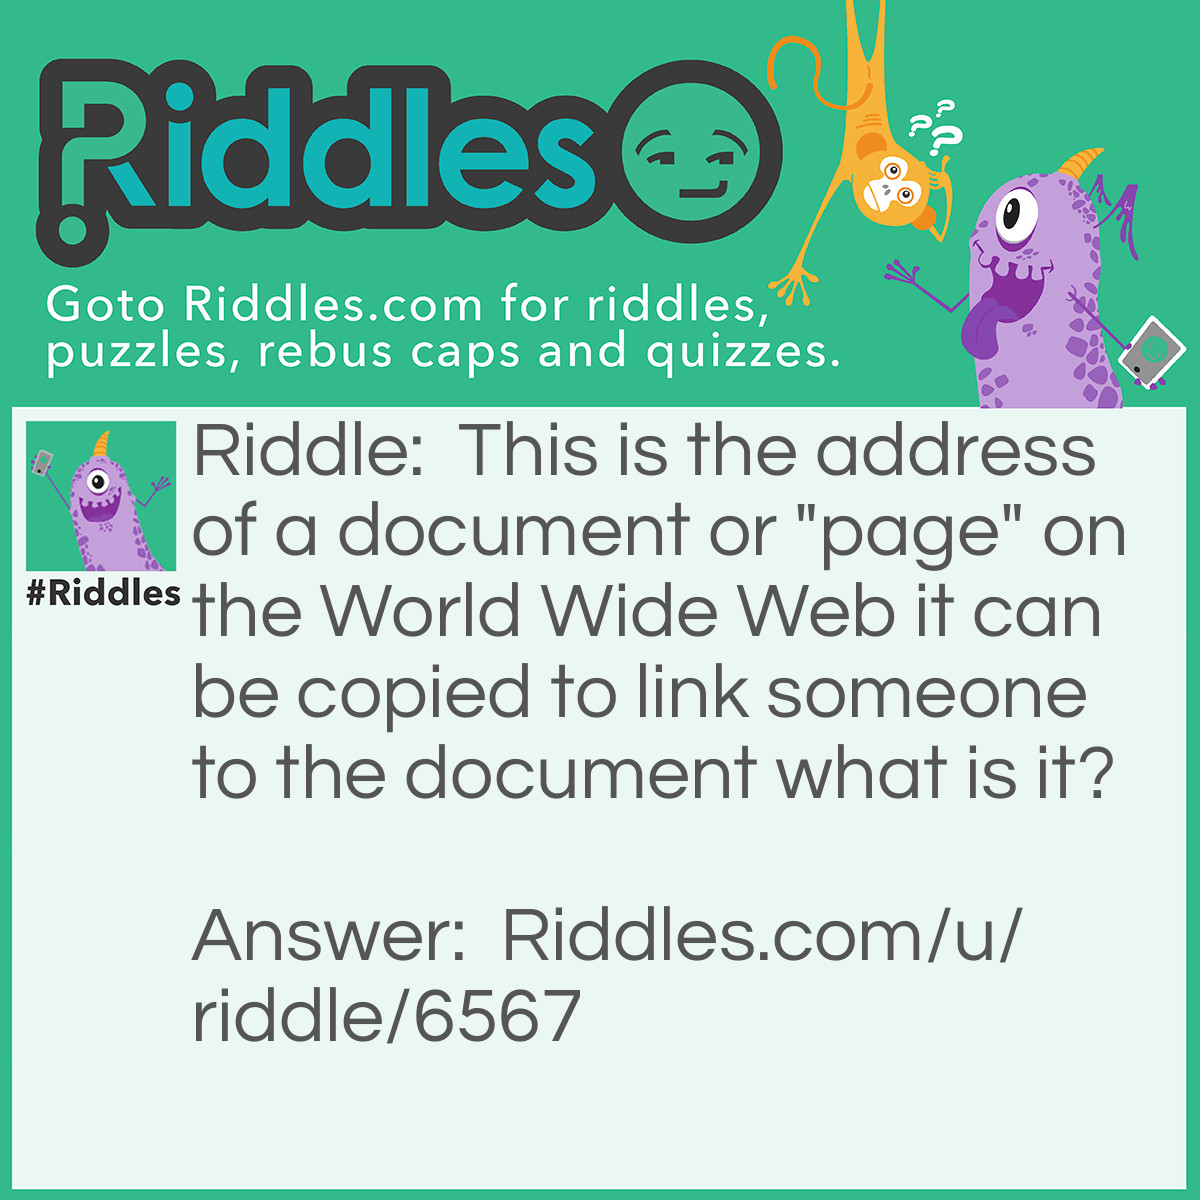 Riddle: This is the address of a document or "page" on the World Wide Web it can be copied to link someone to the document what is it? Answer: URL